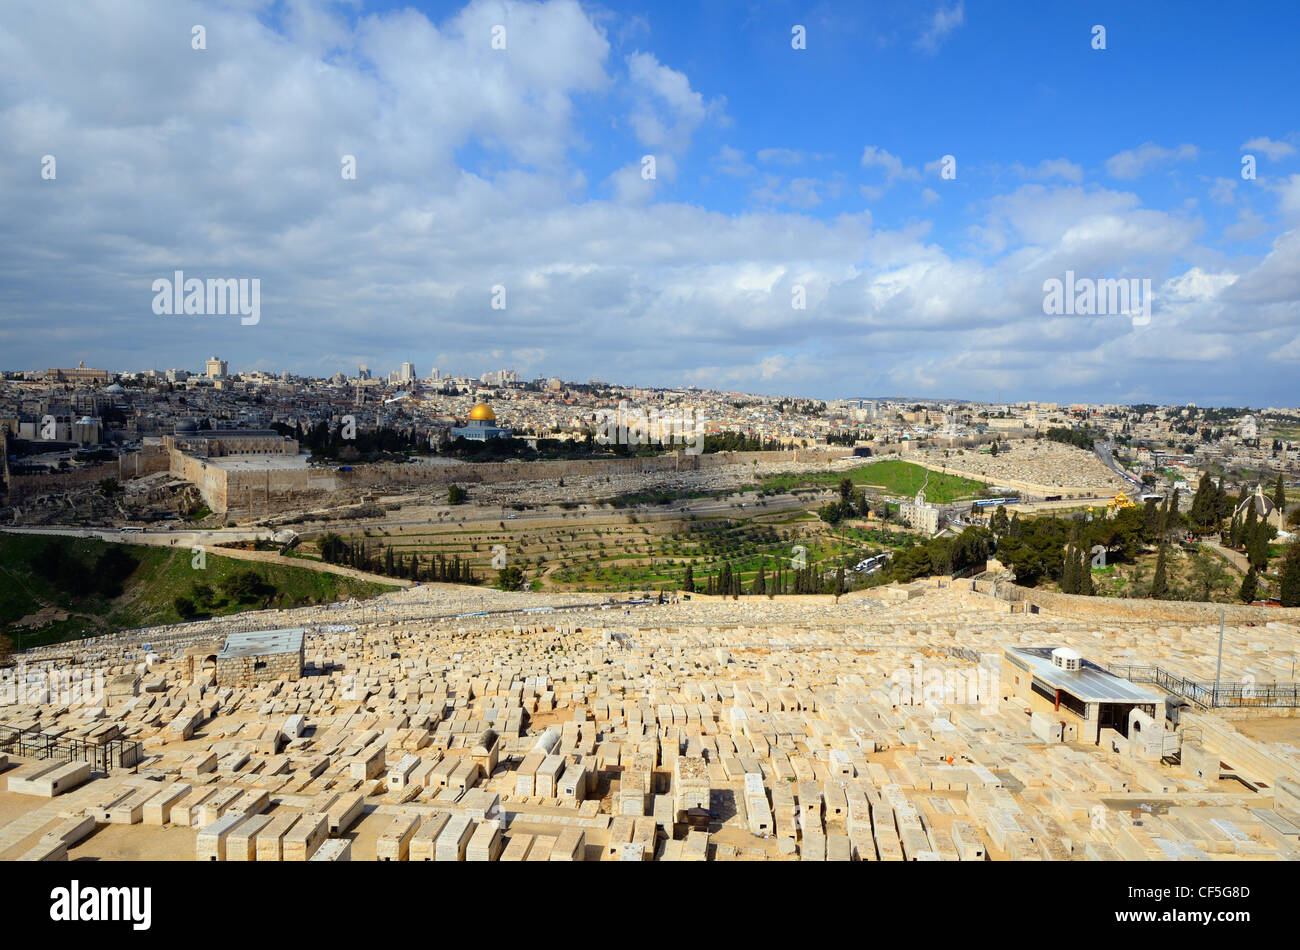 View of tombs on Mount of Olives and Old City of Jerusalem, Israel. Stock Photo